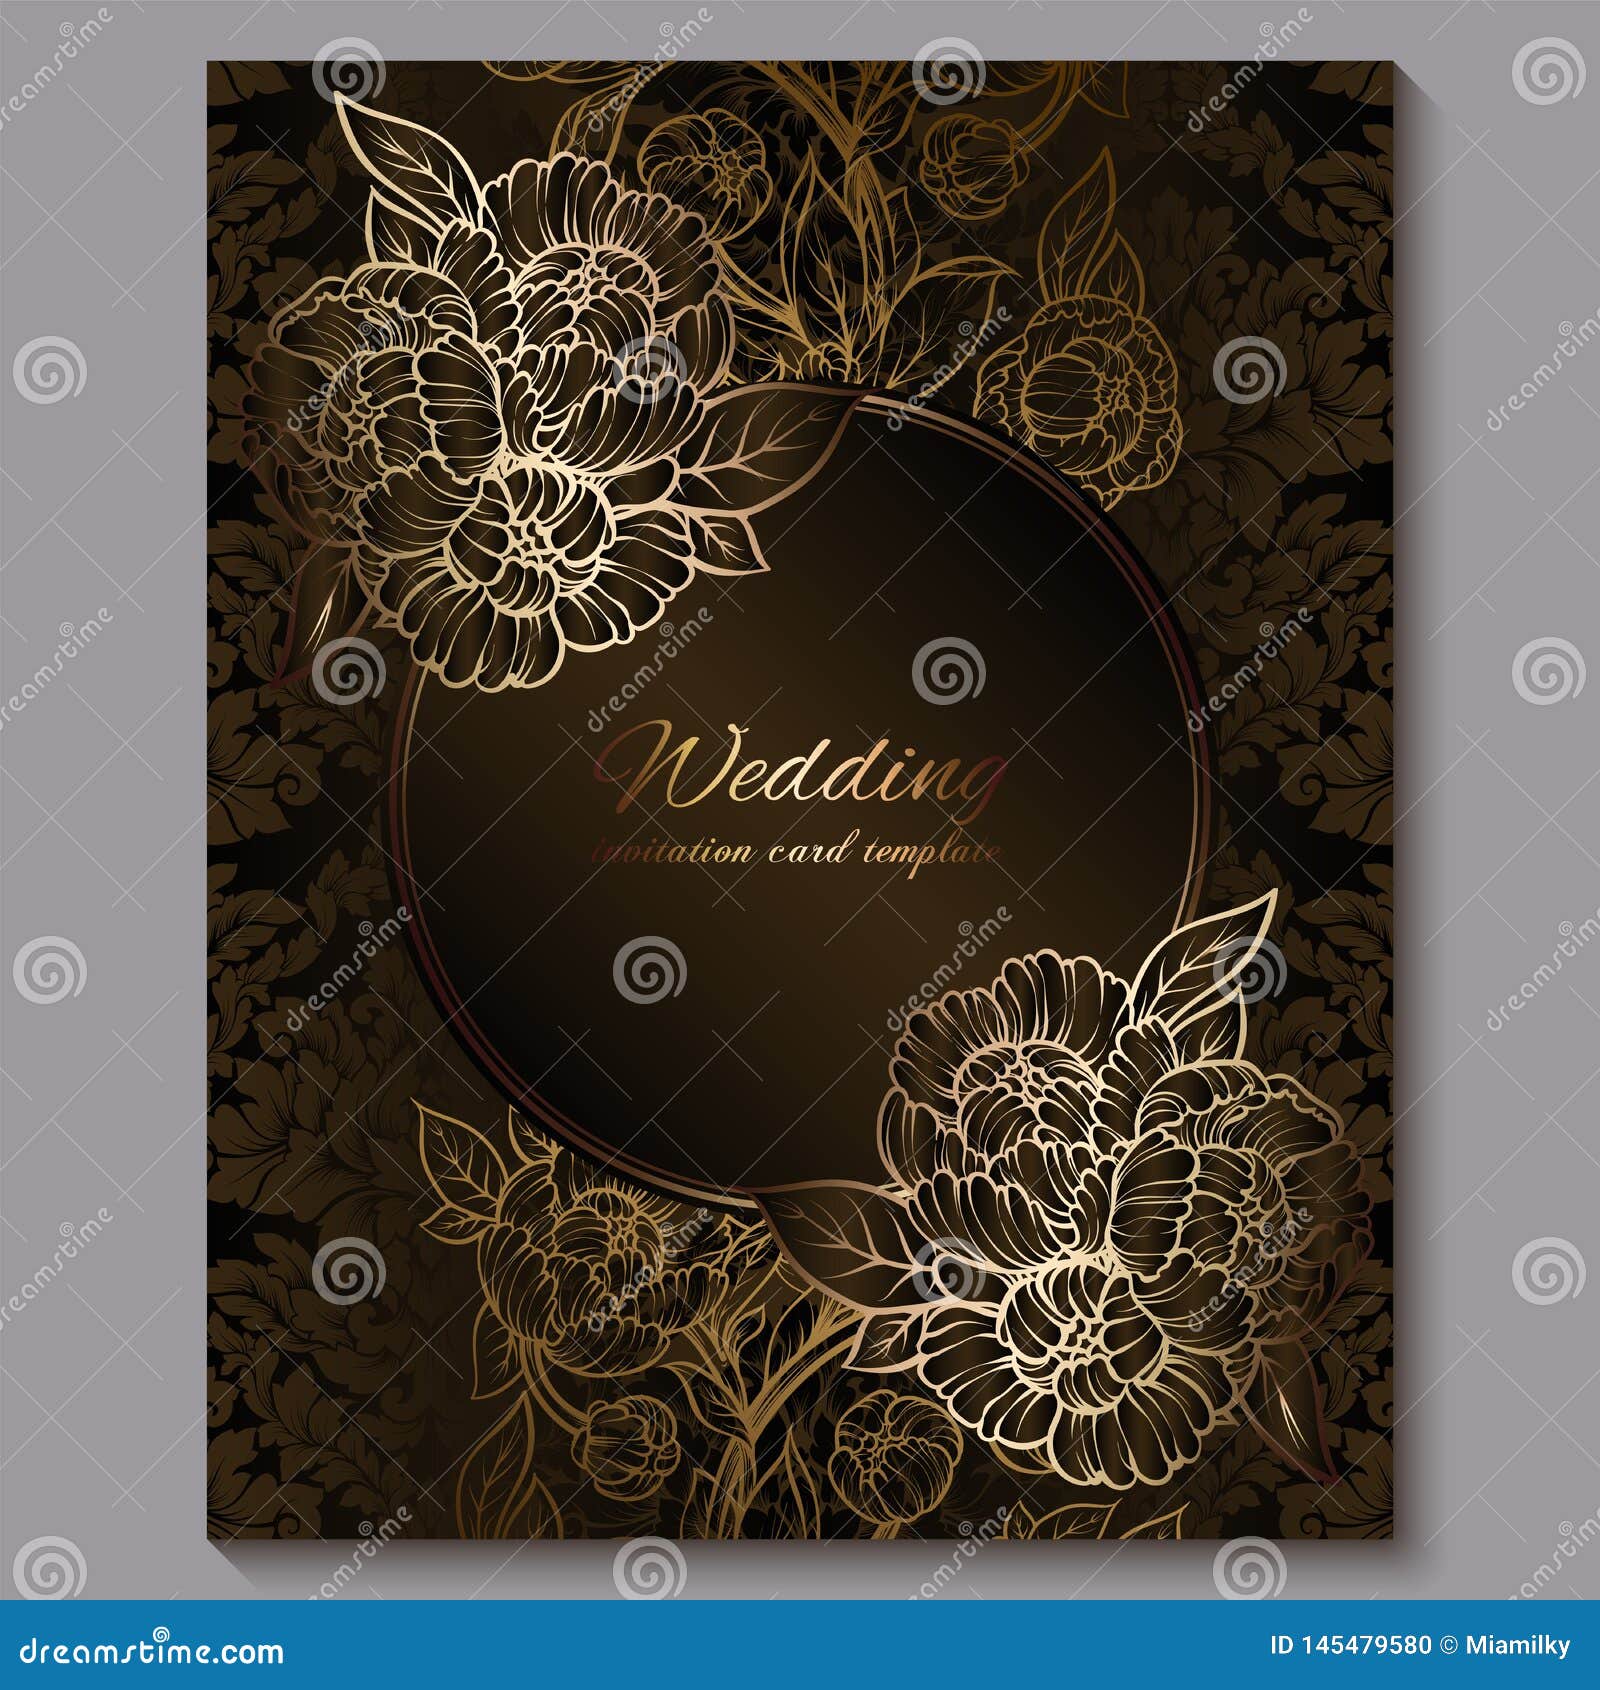 Royal Invitation Background Images HD Pictures and Wallpaper For Free  Download  Pngtree